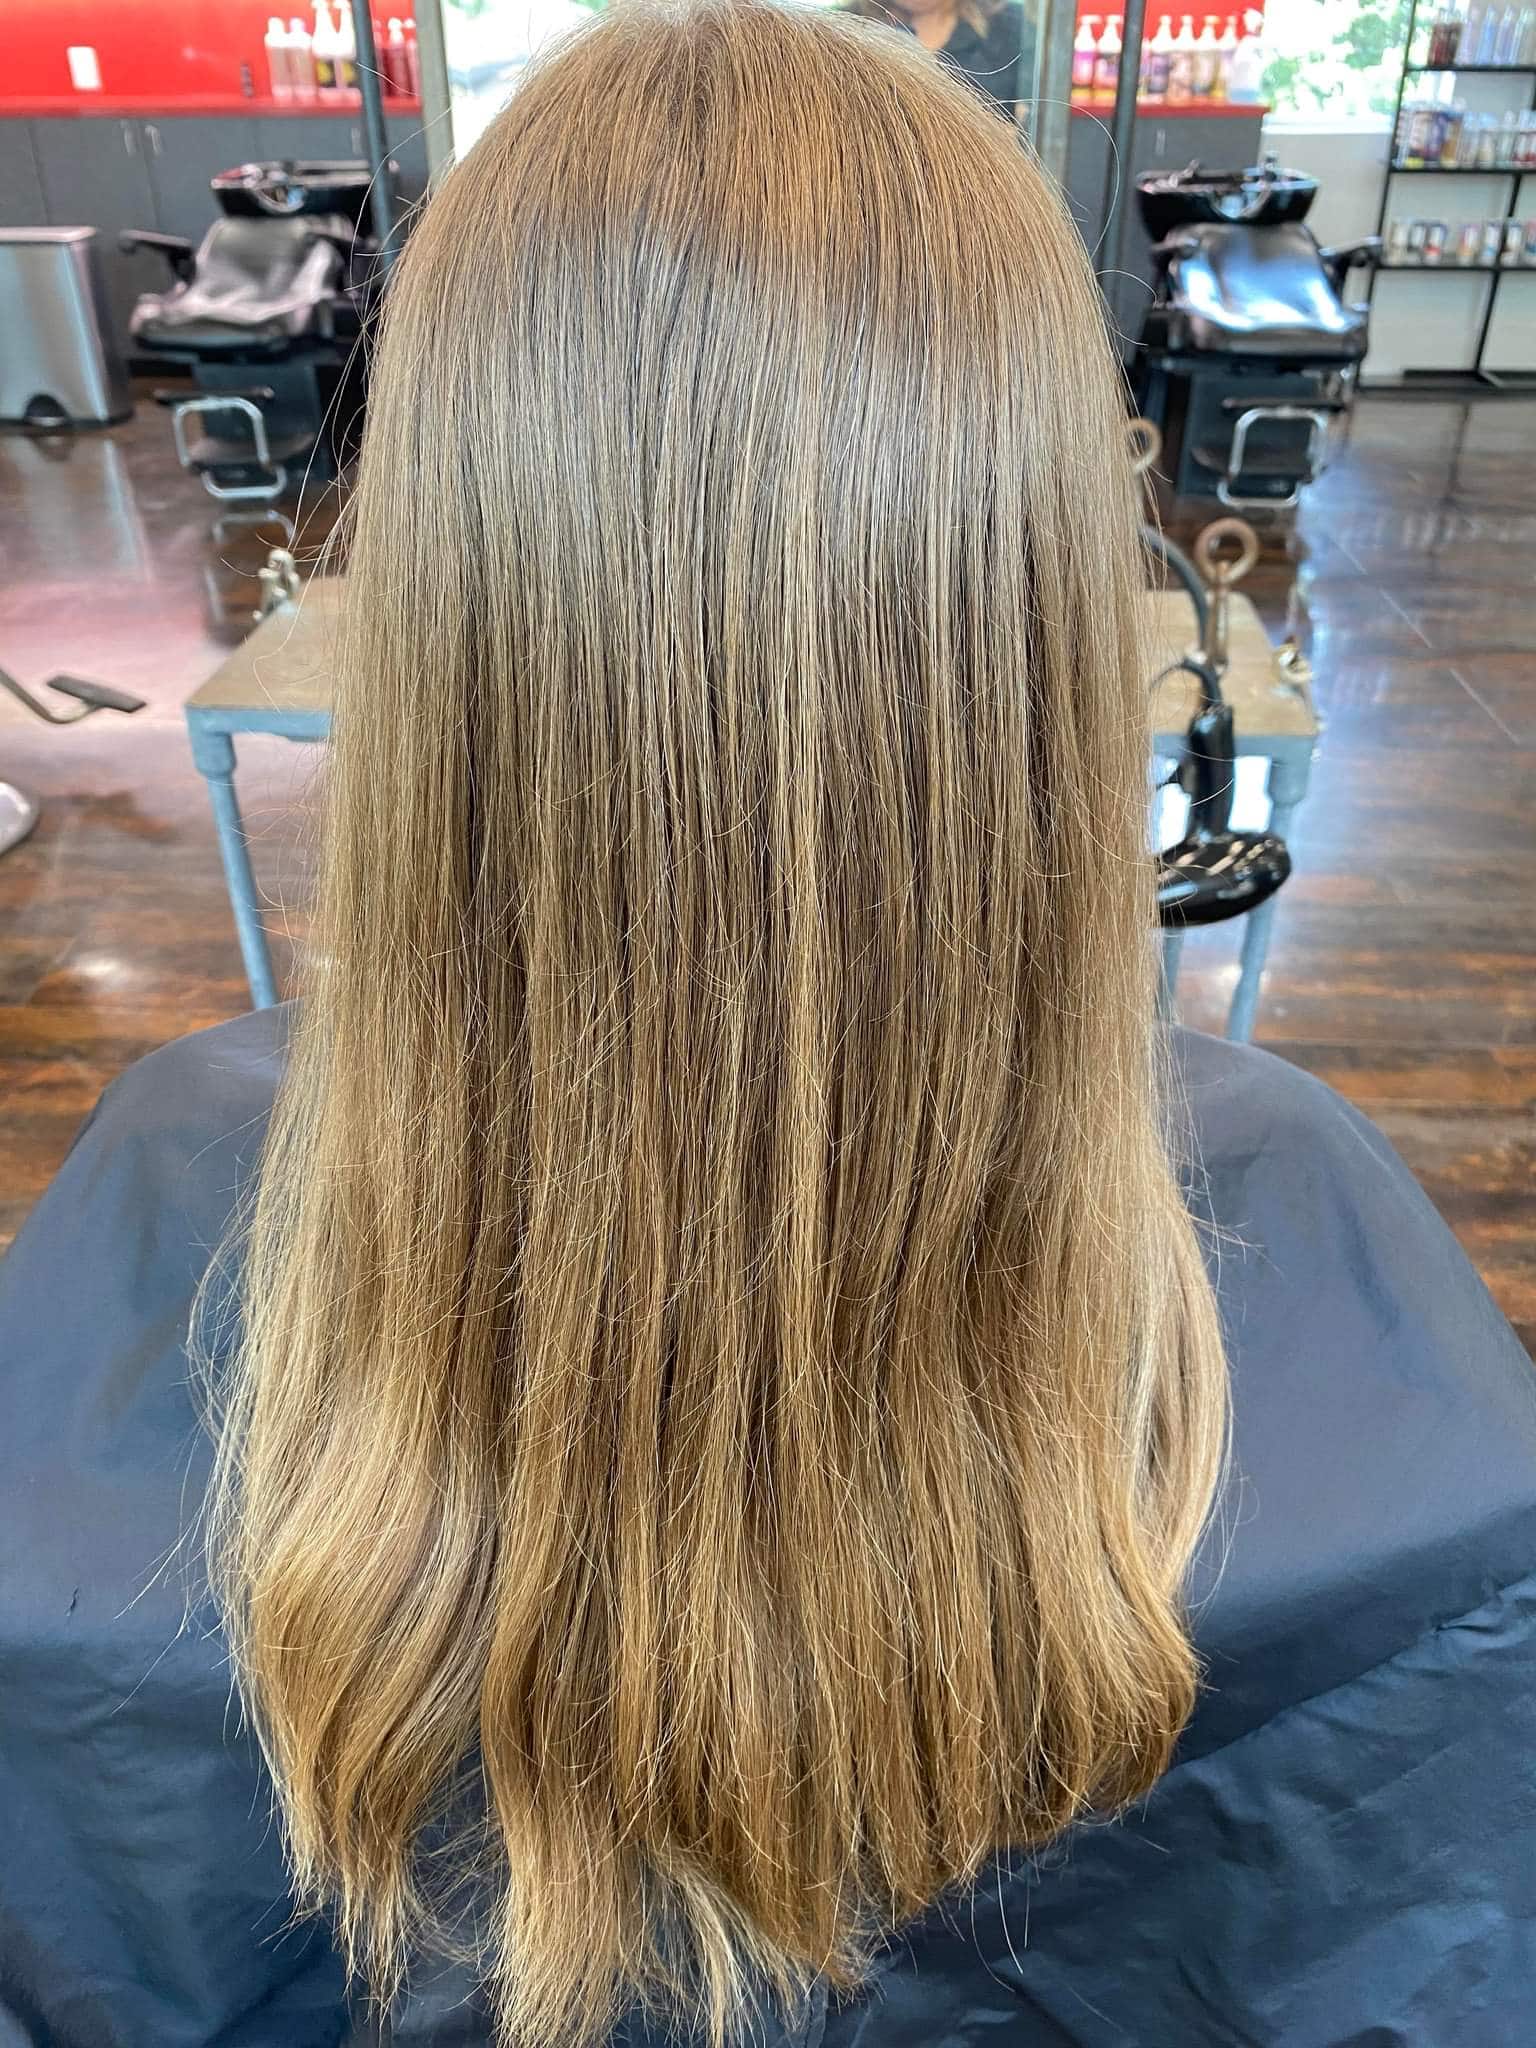 WHITE Salon - Houston, TX, US, hairstyle for long face